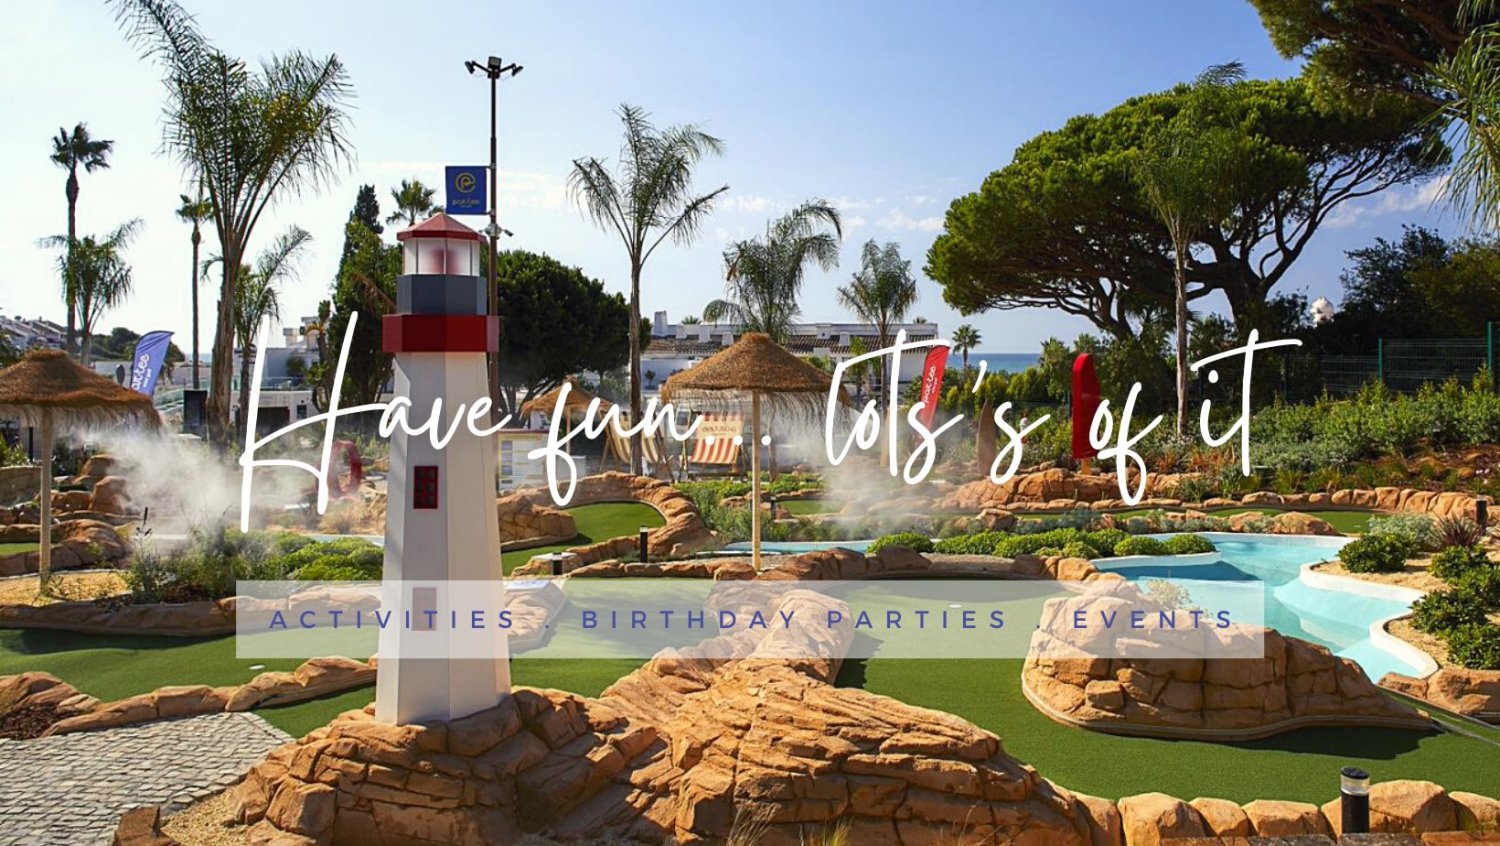 Top 5 Things Your Kids will Love in Algarve